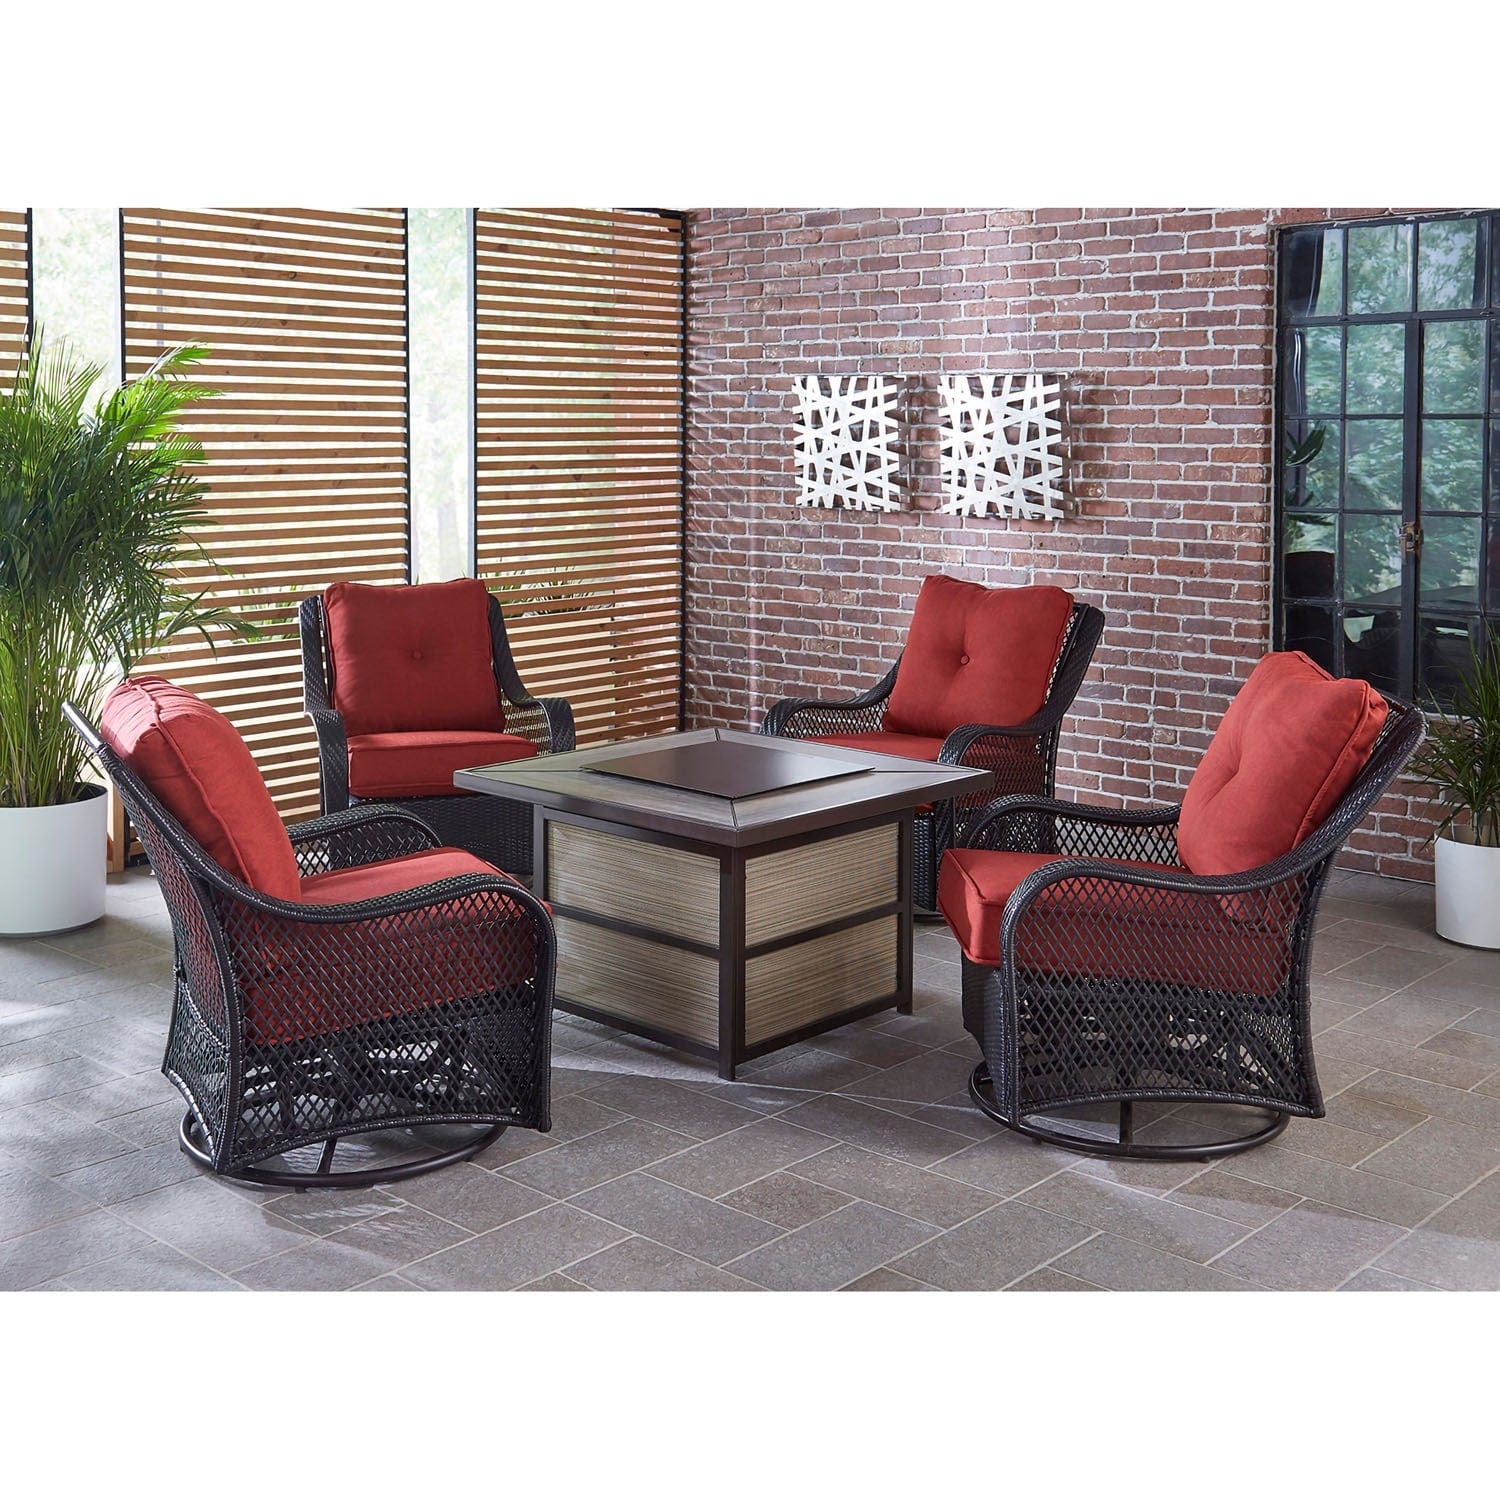 Hanover Fire Pit Chat Set Hanover Orleans 5-Piece Fire Pit Chat Set with a 40,000 BTU Fire Pit Table and 4 Woven Swivel Gliders in Autumn Berry | ORL5PCSW4SQFP-BRY